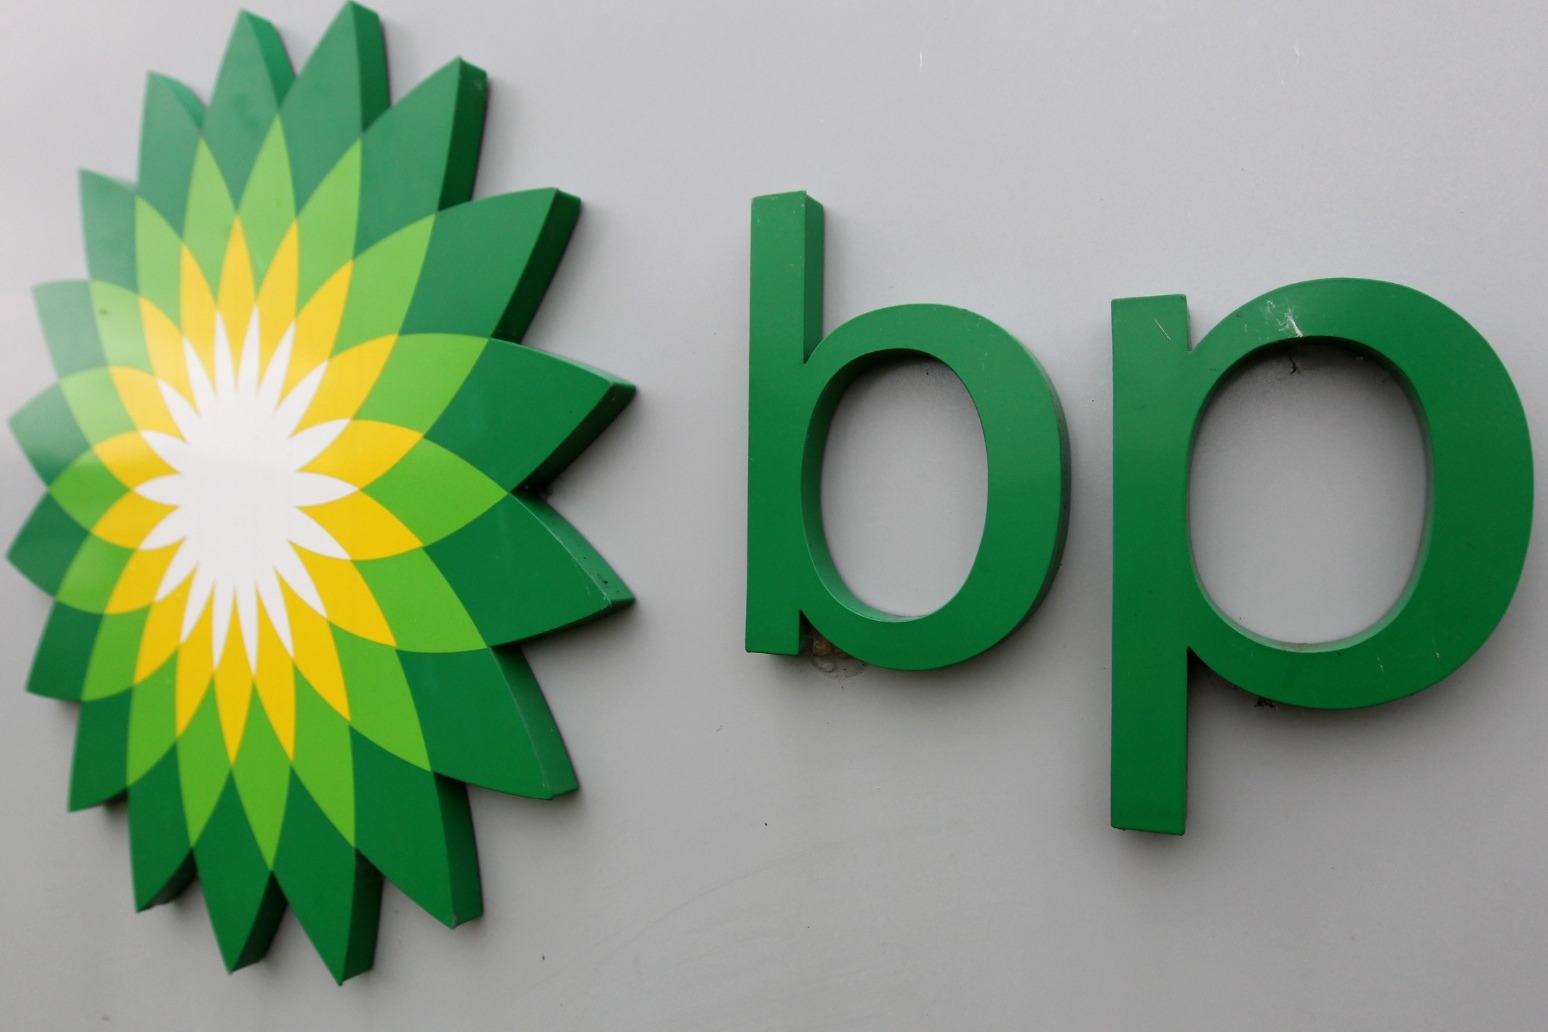 BP to buy US biogas producer Archaea Energy for £3.6bn 